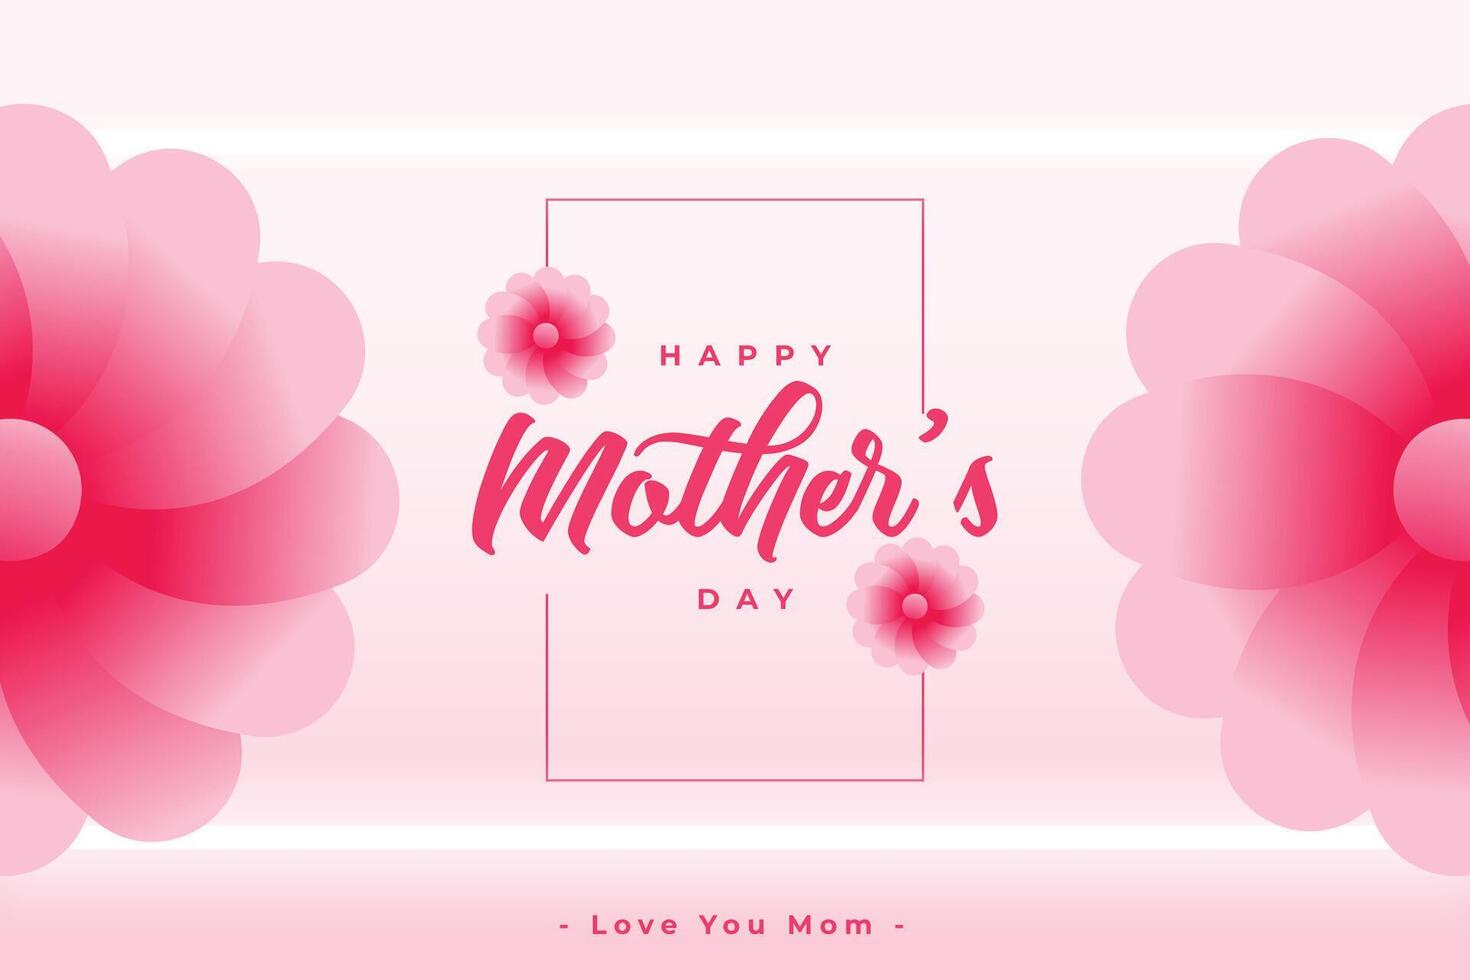 graphic card for mother's day event design vector